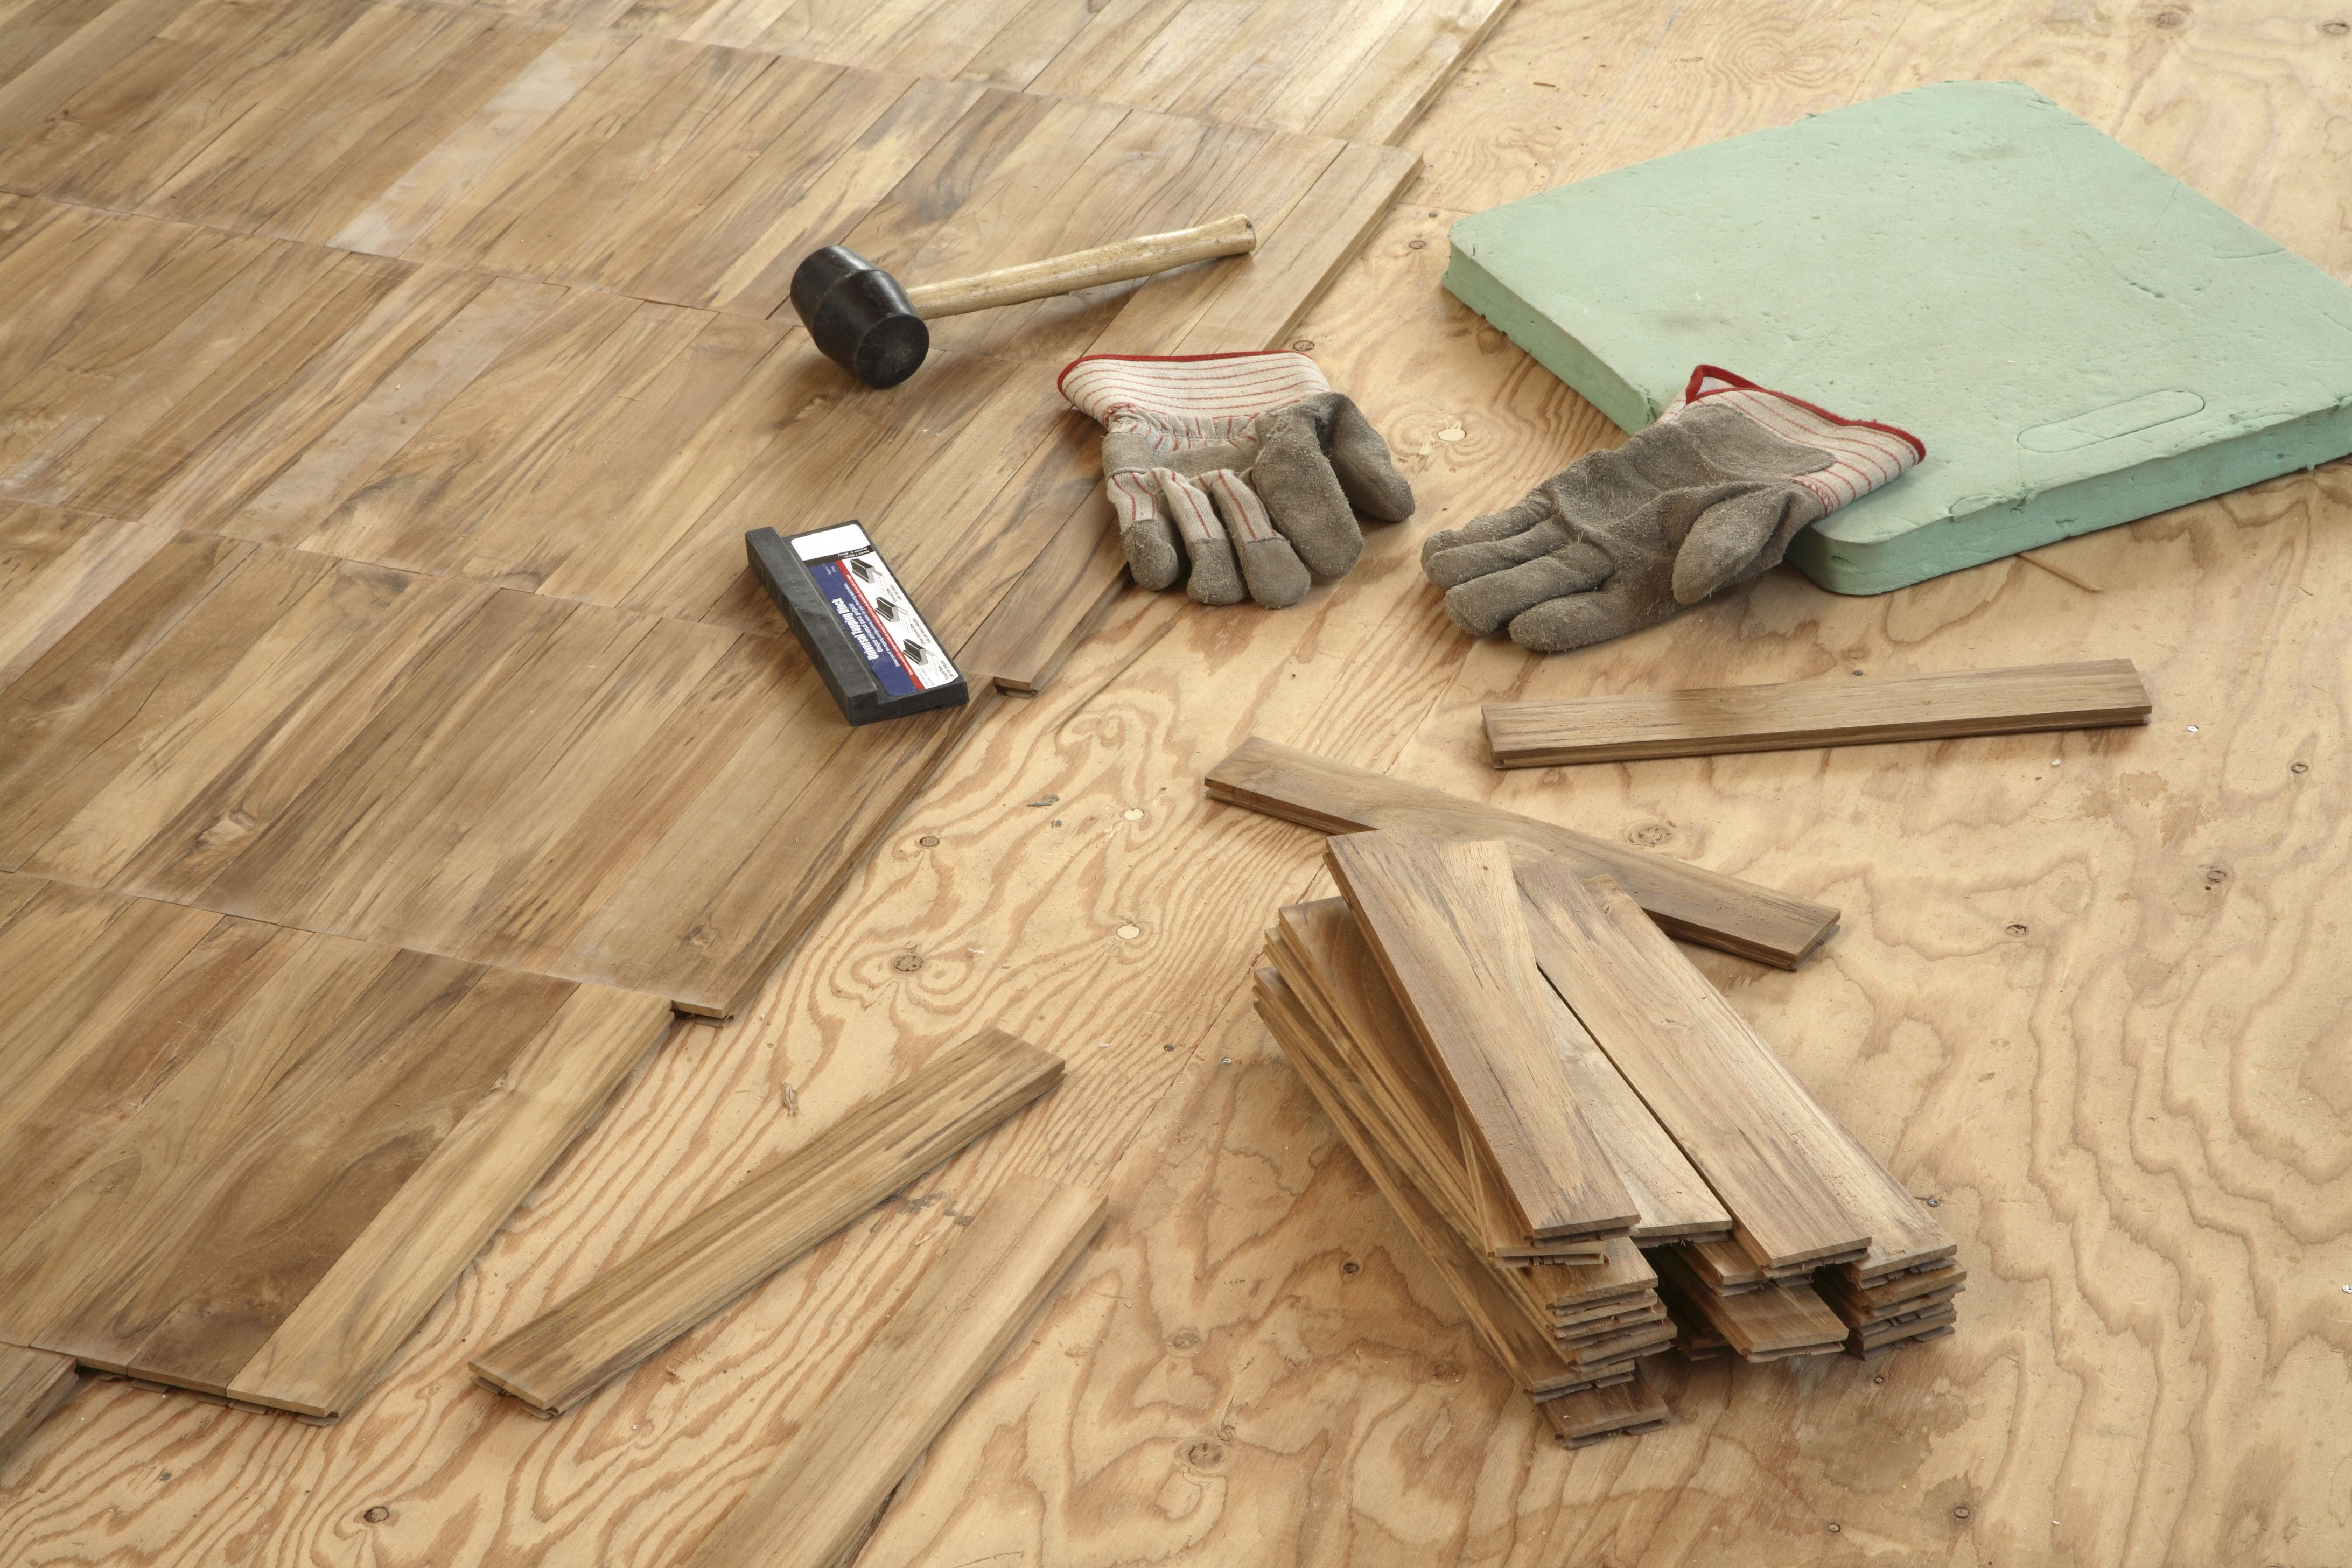 21 Awesome Hardwood Floor Refinishing Albuquerque 2024 free download hardwood floor refinishing albuquerque of plywood underlayment pros and cons types and brands with regard to plywoodunderlaymentunderwoodflooring 5ac24fbcae9ab8003781af25